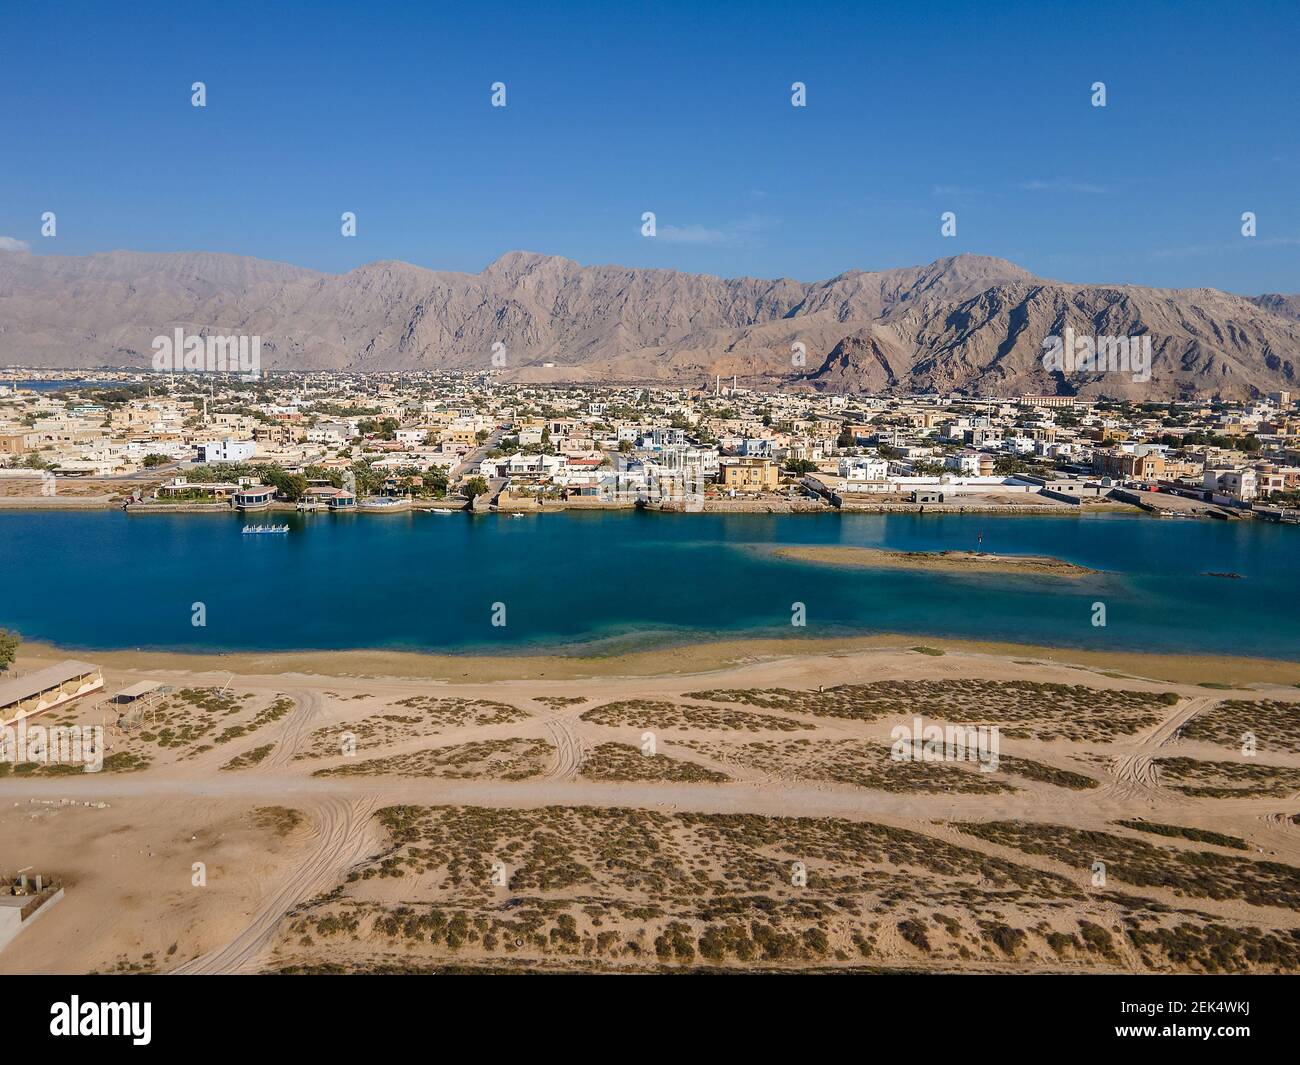 Al Rams county, the suburb of Ras Al Khaimah emirate in the United Arab Emirates settling bellow the sandstone mountains by the seaside aerial view Stock Photo